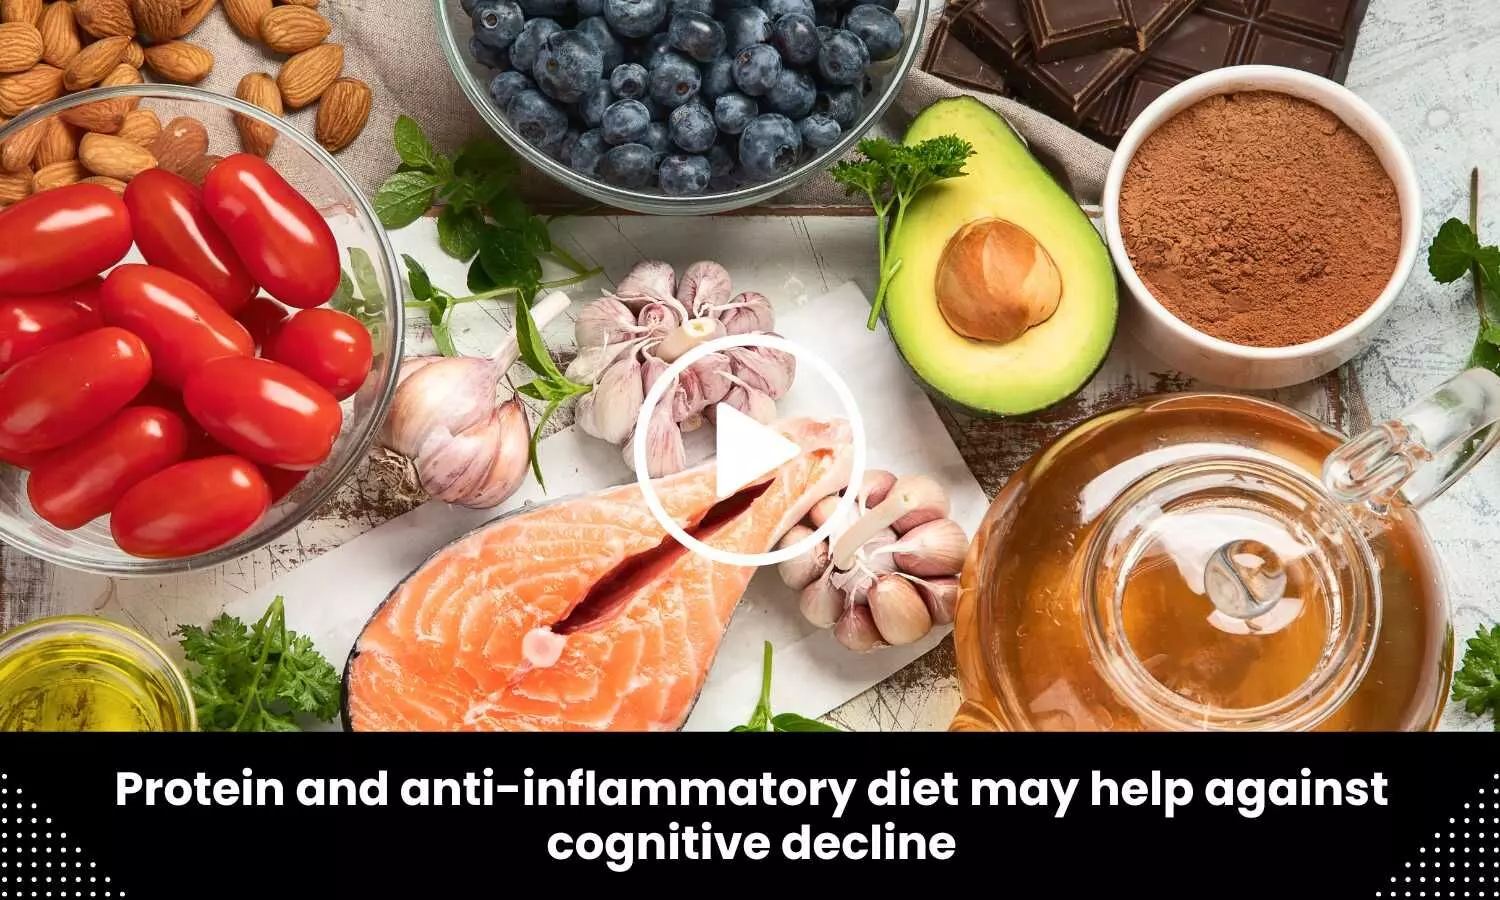 Protein and anti-inflammatory diet may help against cognitive decline: Study